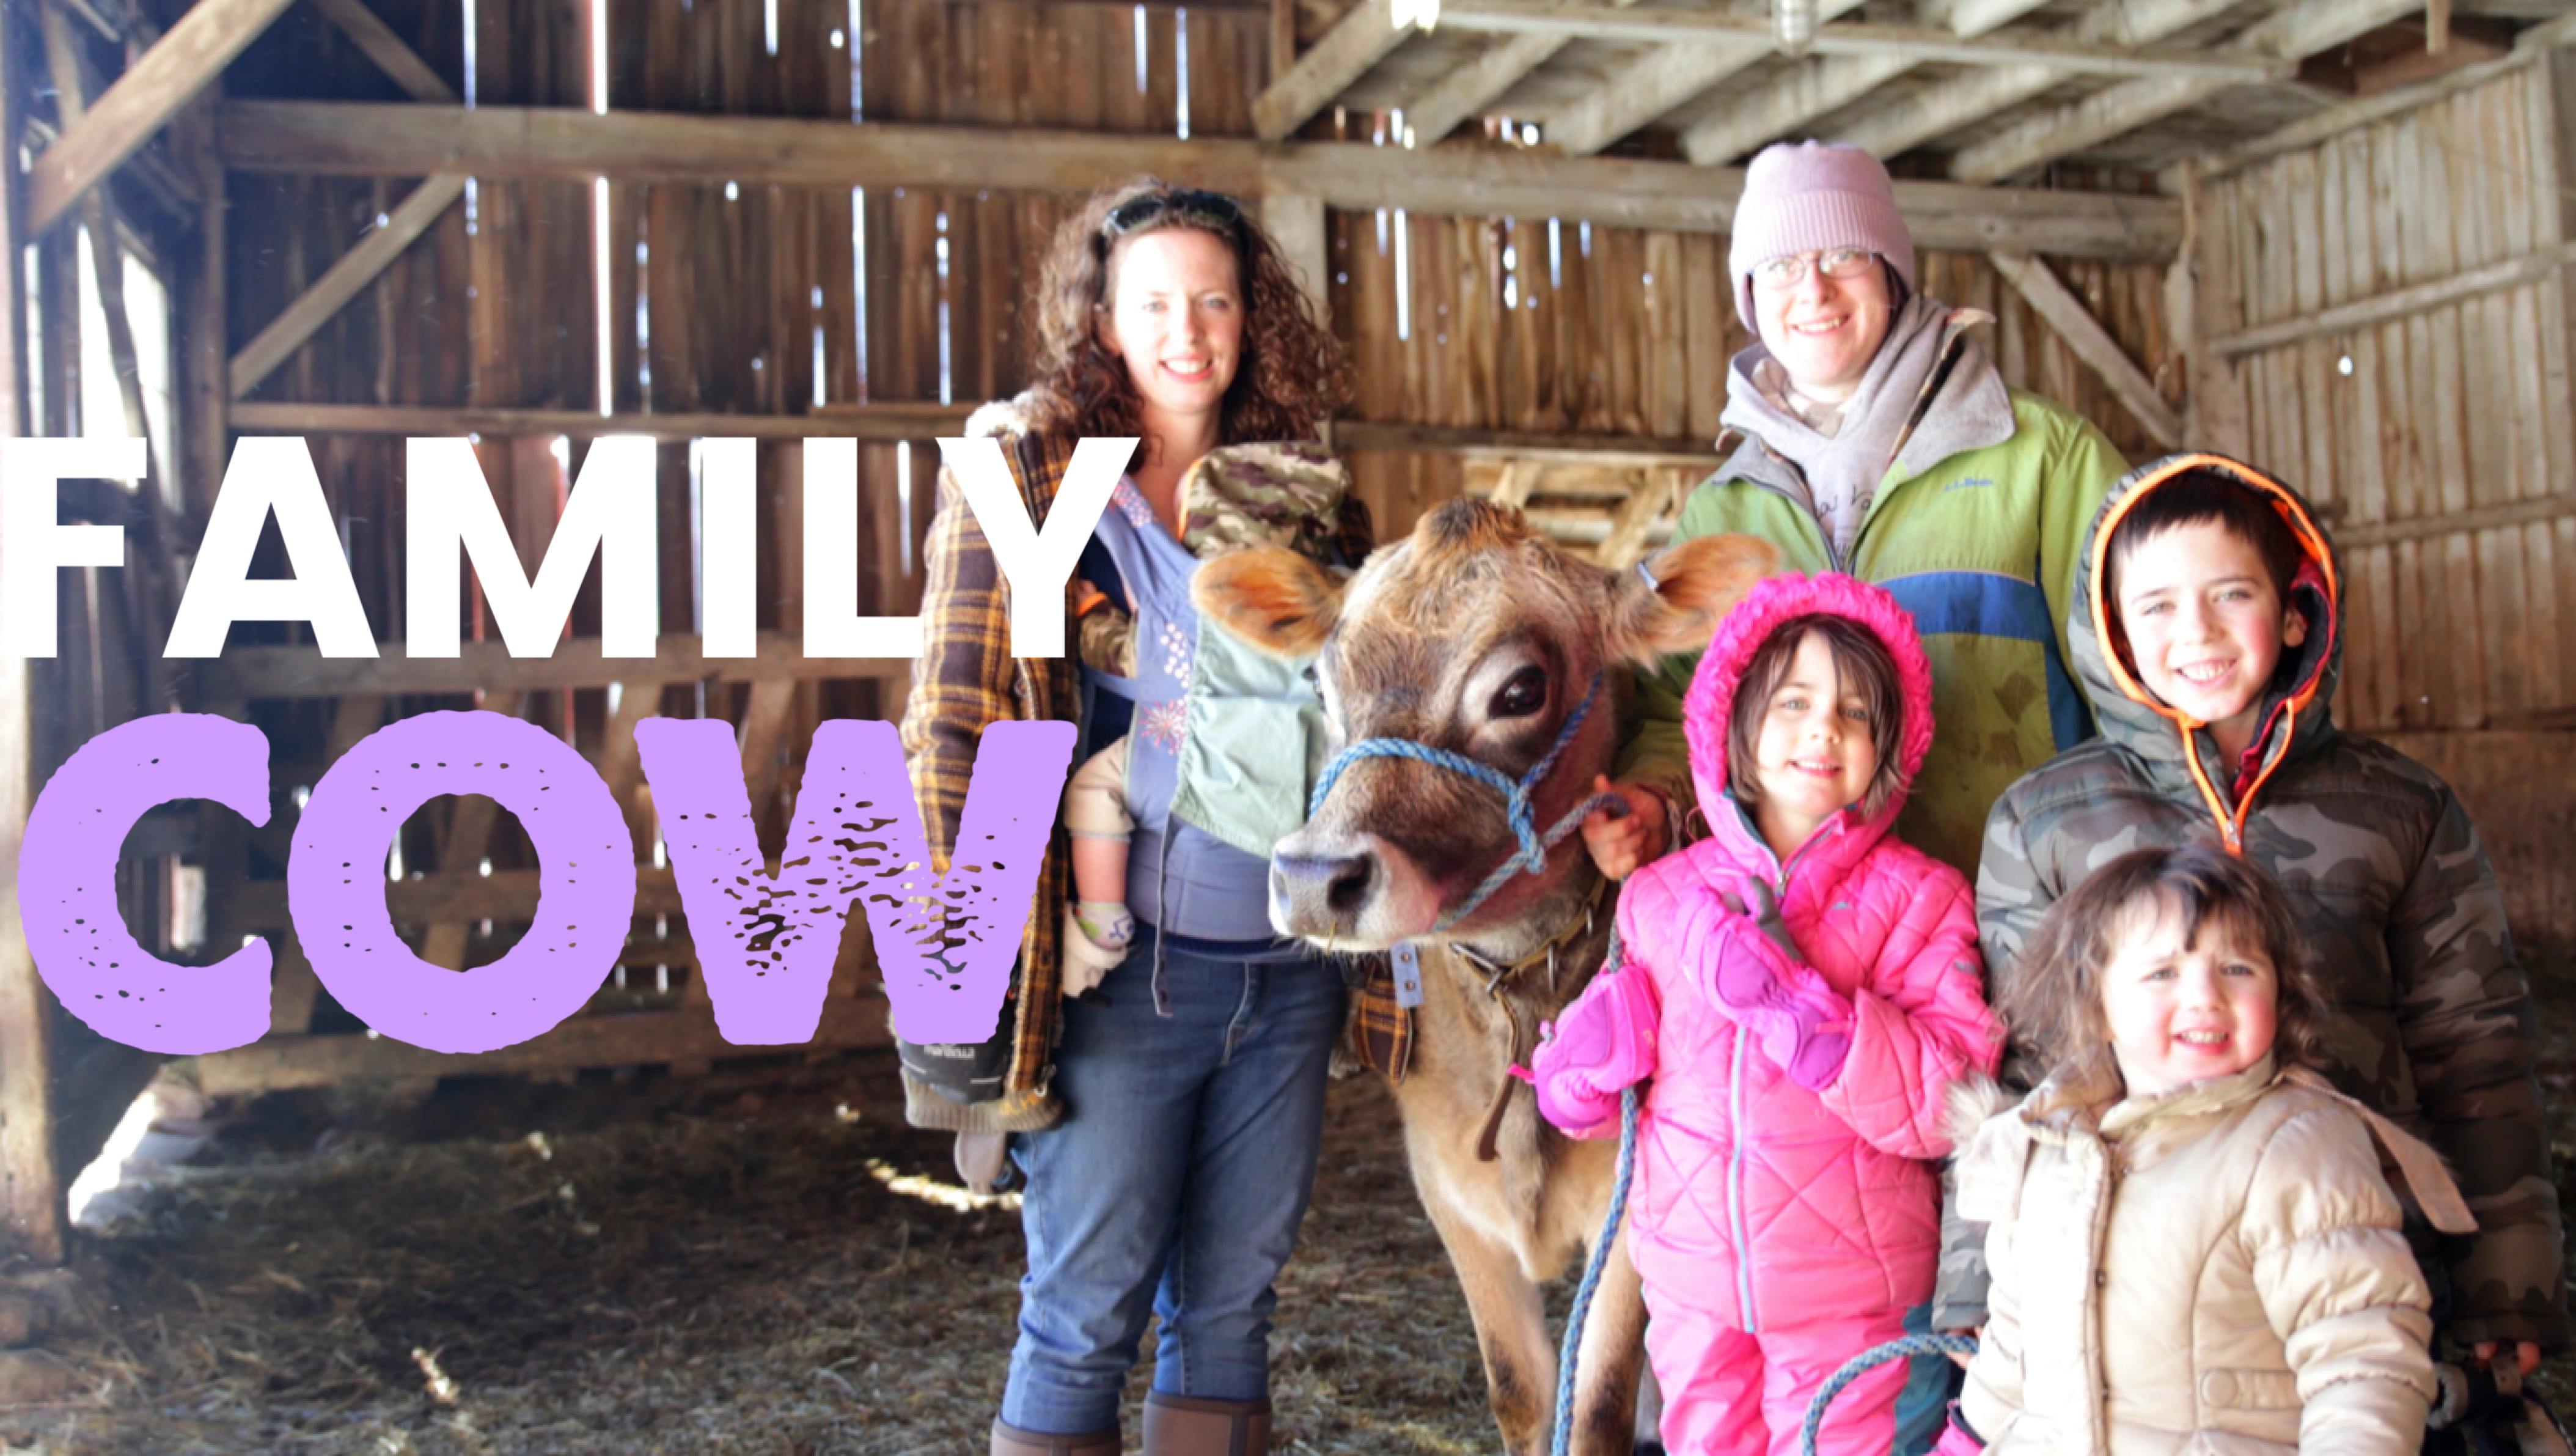 The Family Cow - Should We Get One?